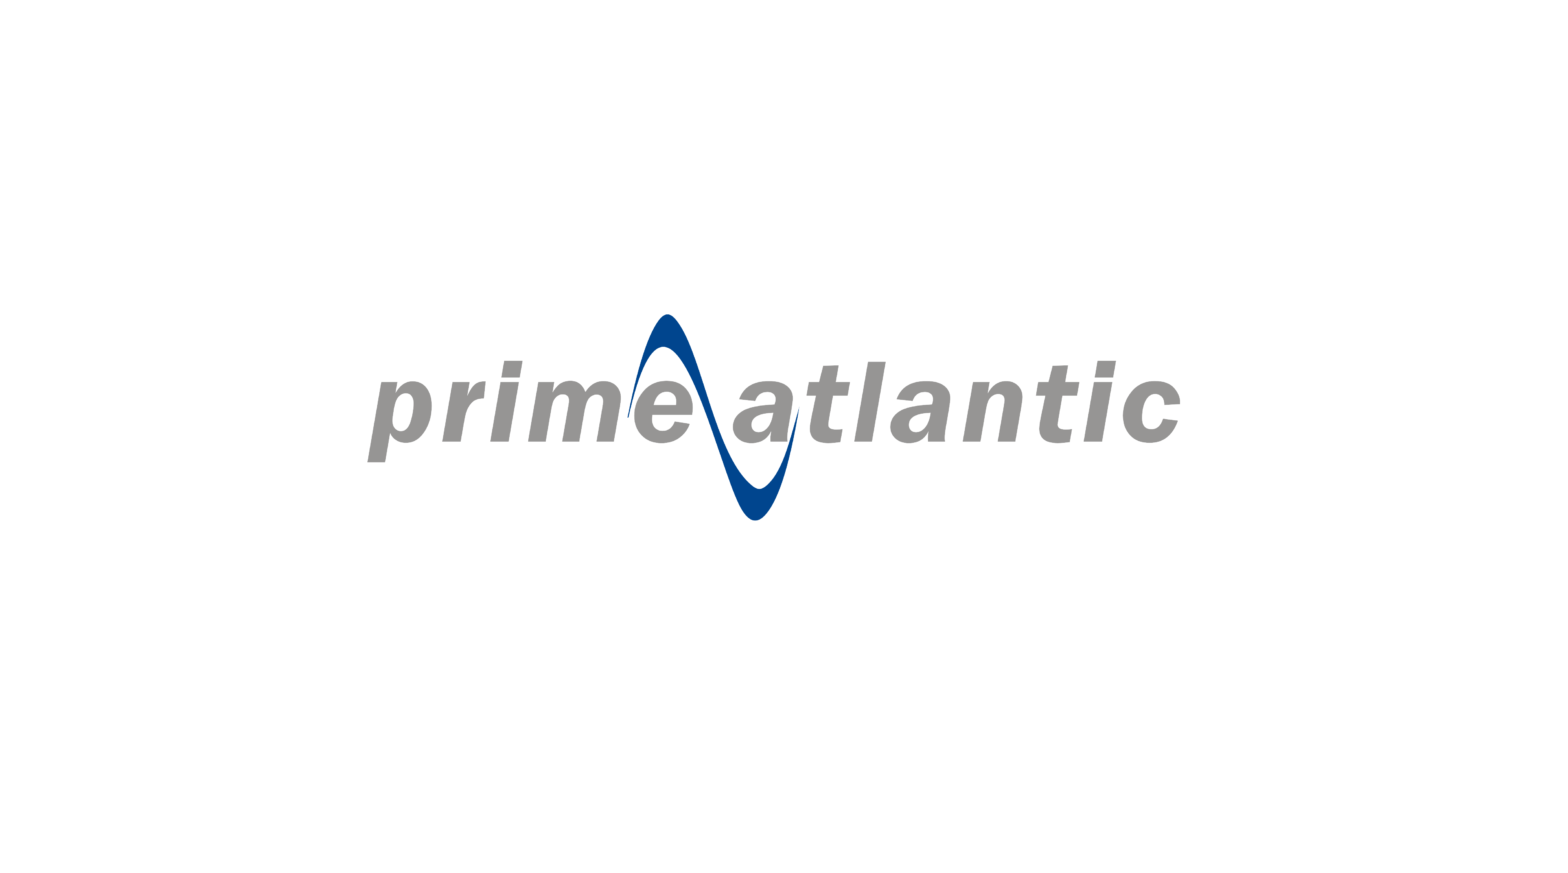 Prime Atlantic joins CWEIC as newest Strategic Partner